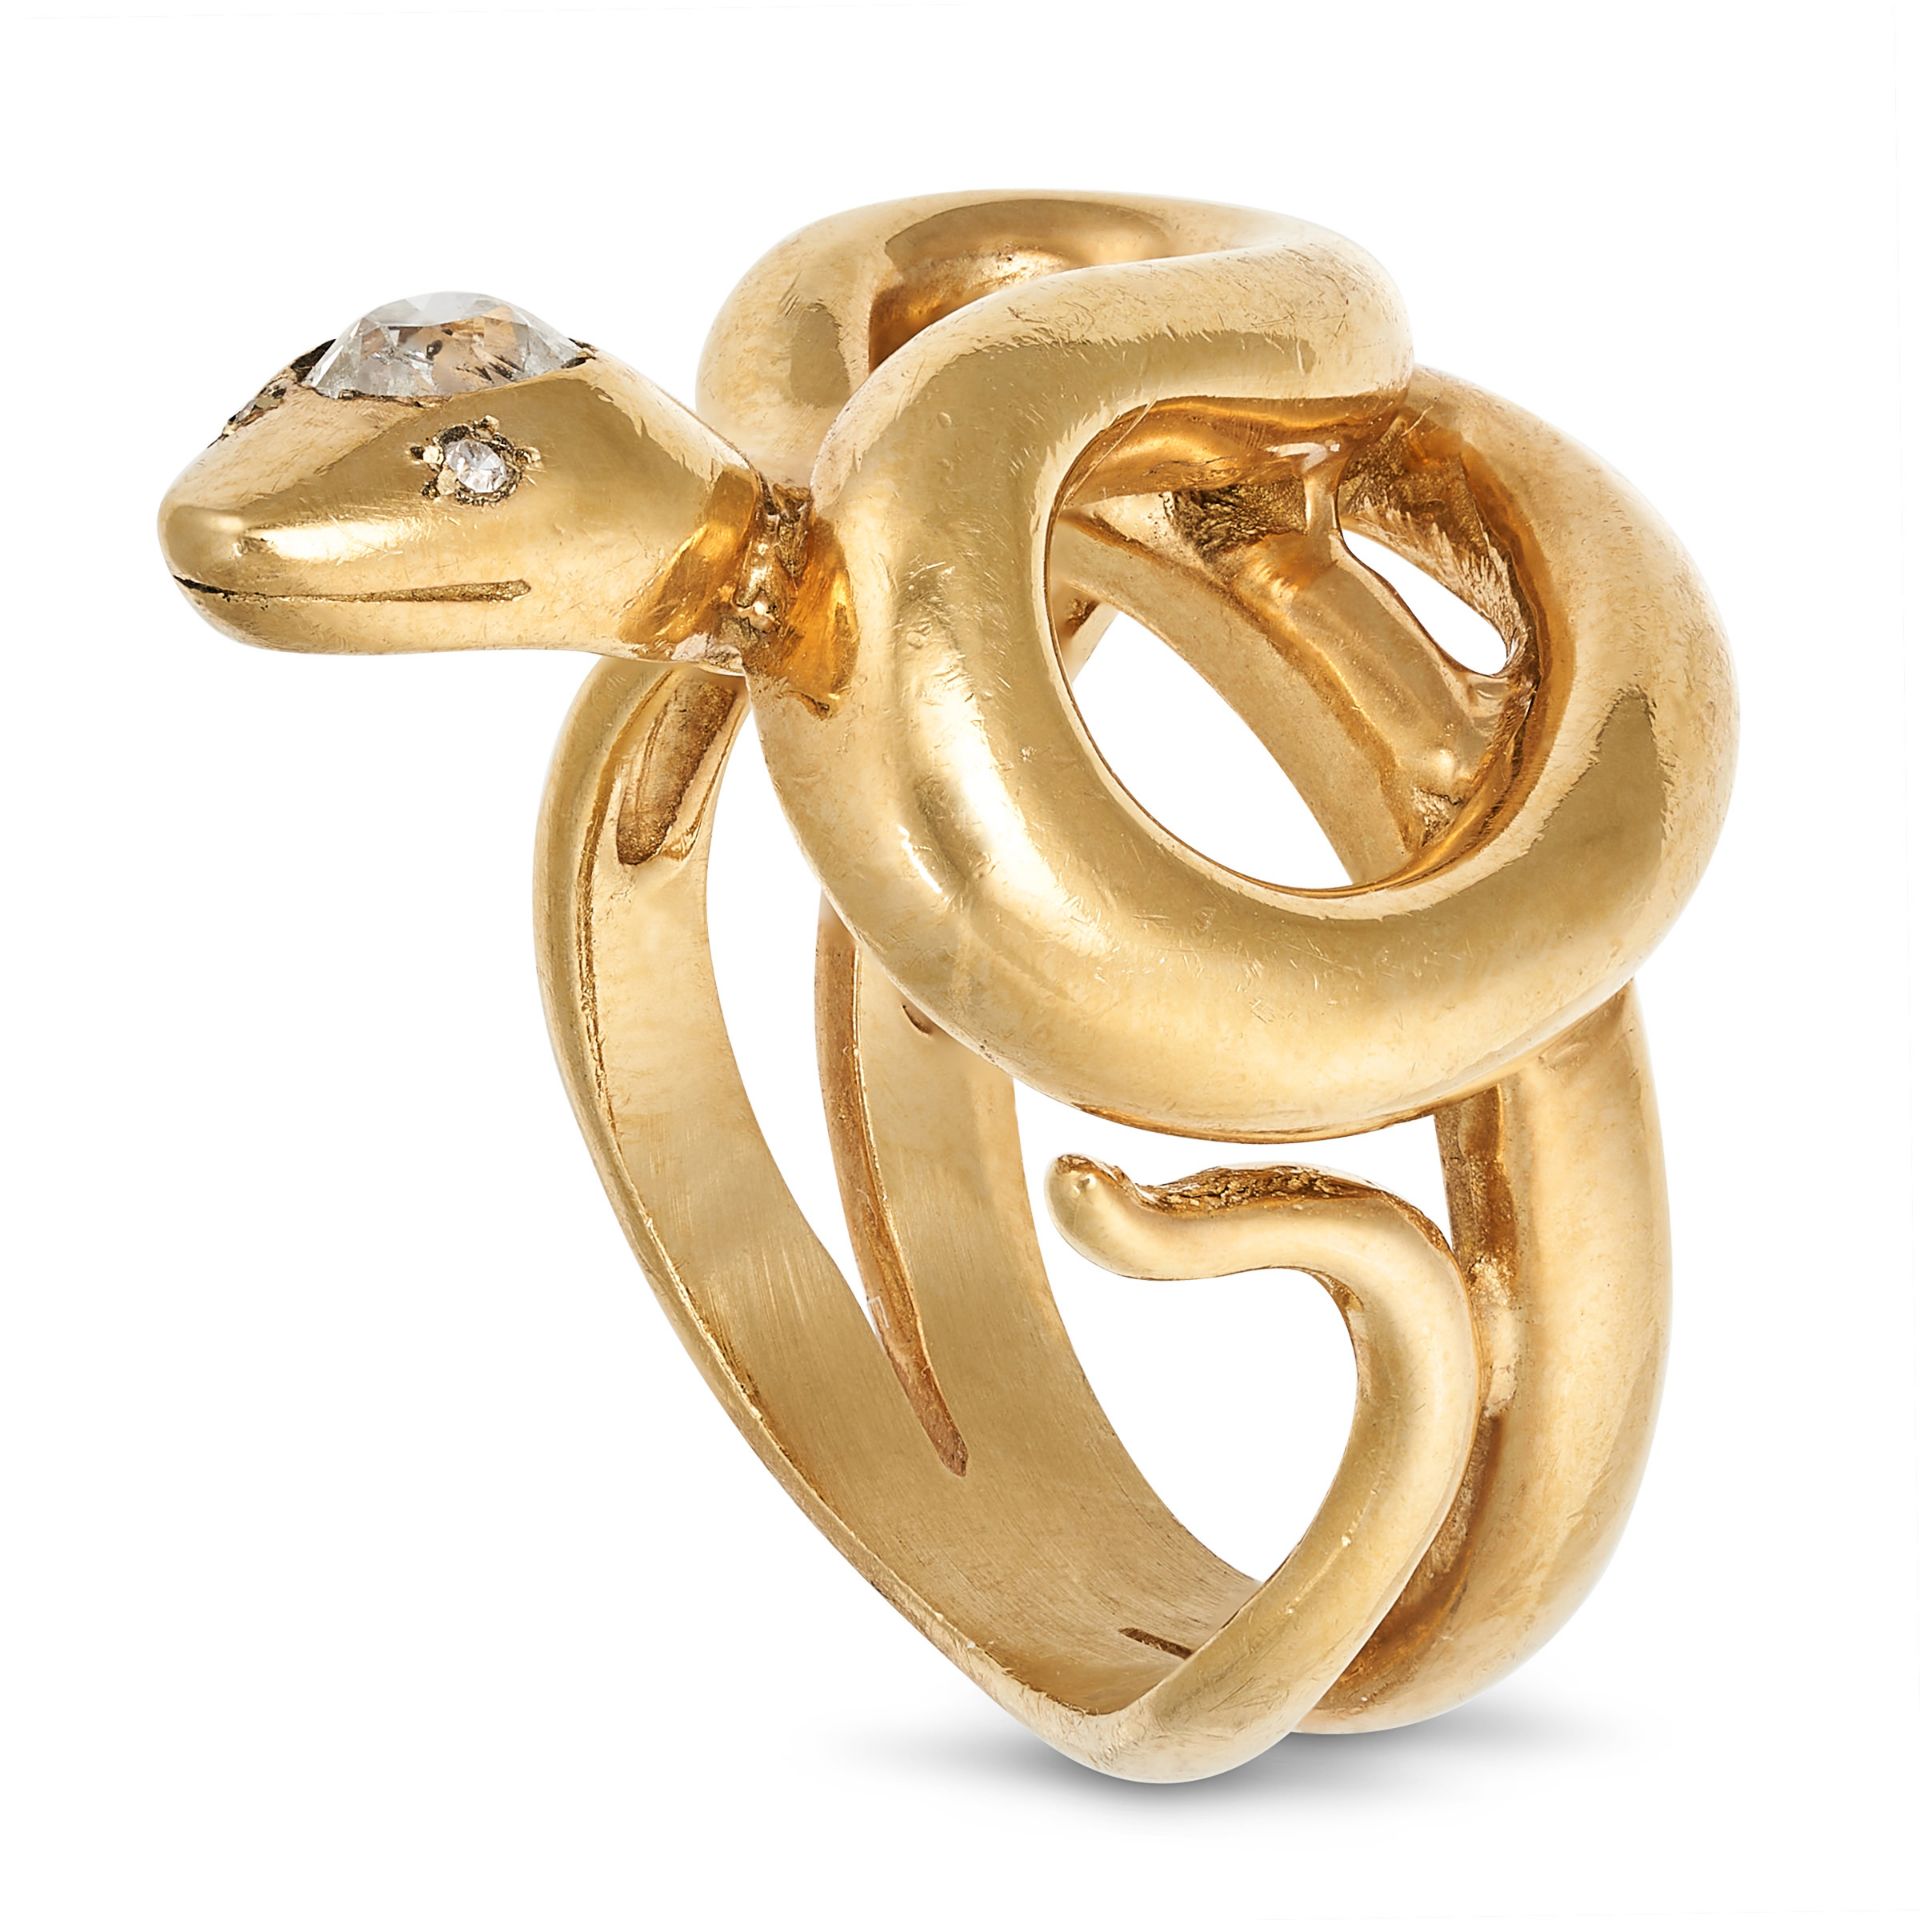 A VINTAGE DIAMOND SNAKE RING in yellow gold, designed as a coiled snake set with an old cut diamo... - Image 2 of 2